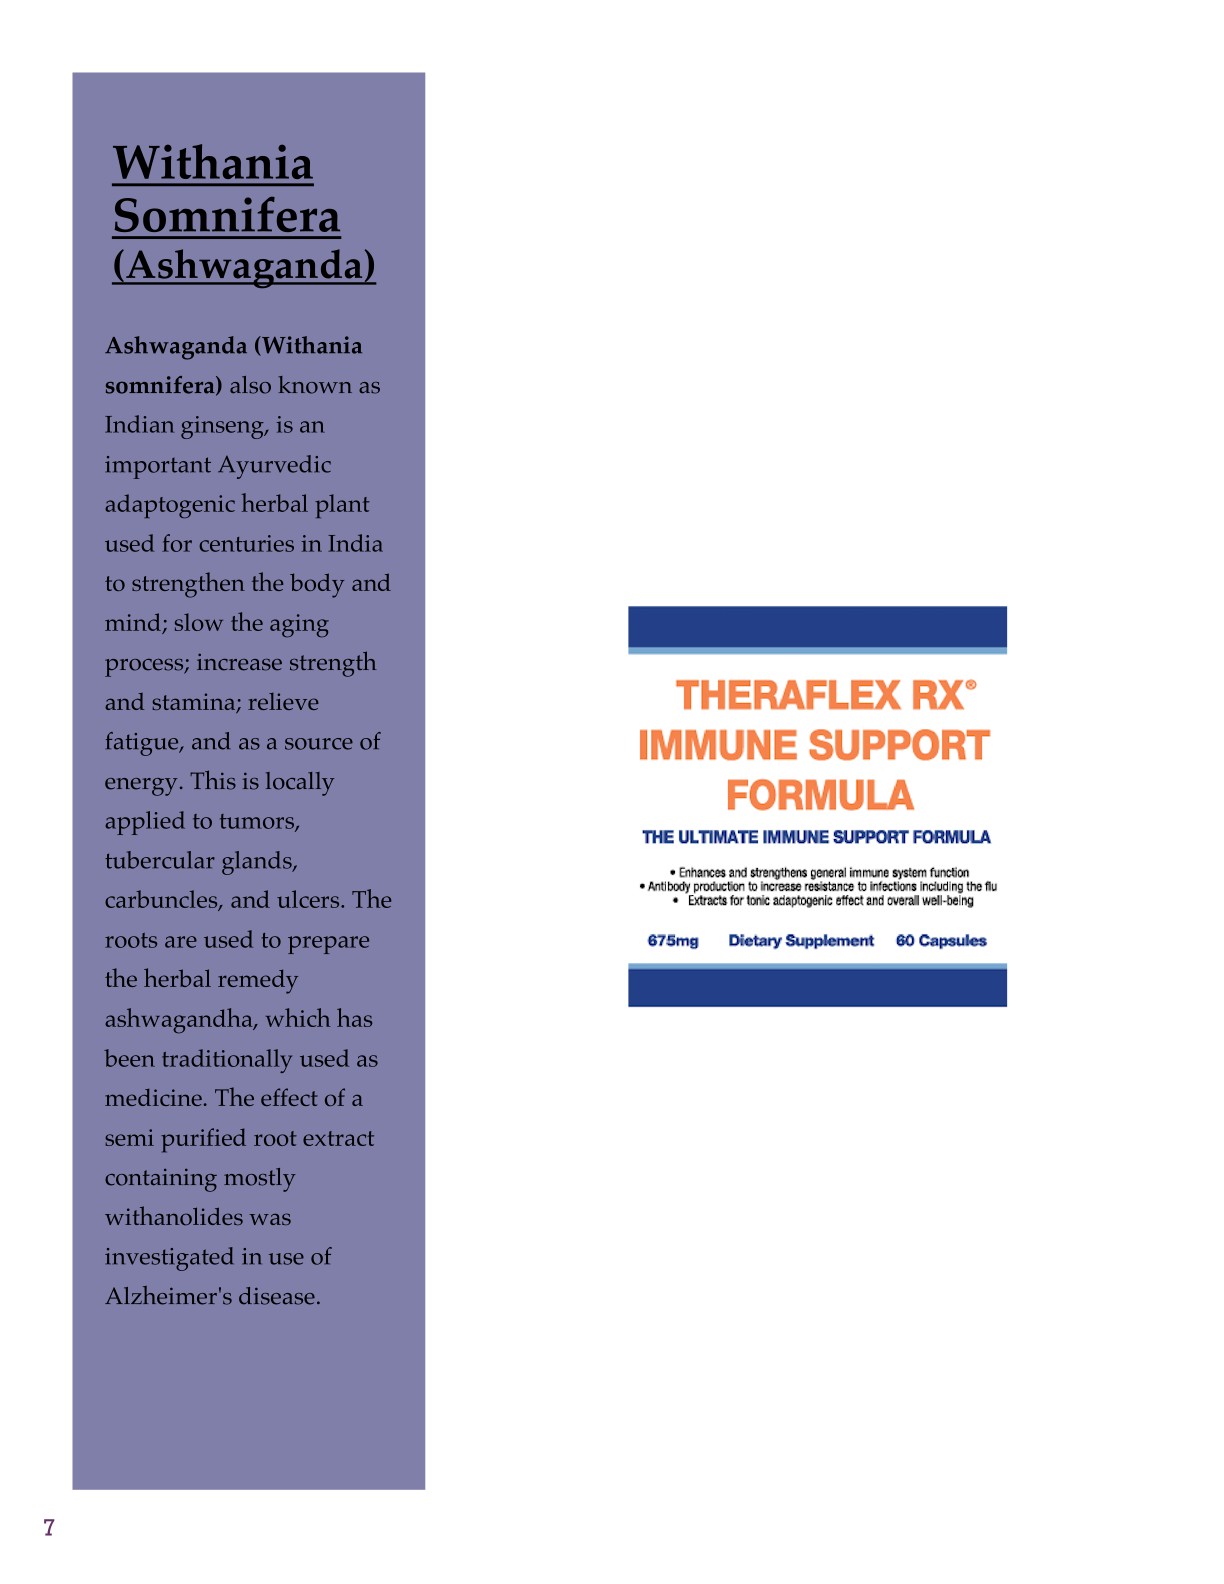 THERAFLEX RX IMMUNE SUPPORT BROCHURE WITHOUT PICS_7